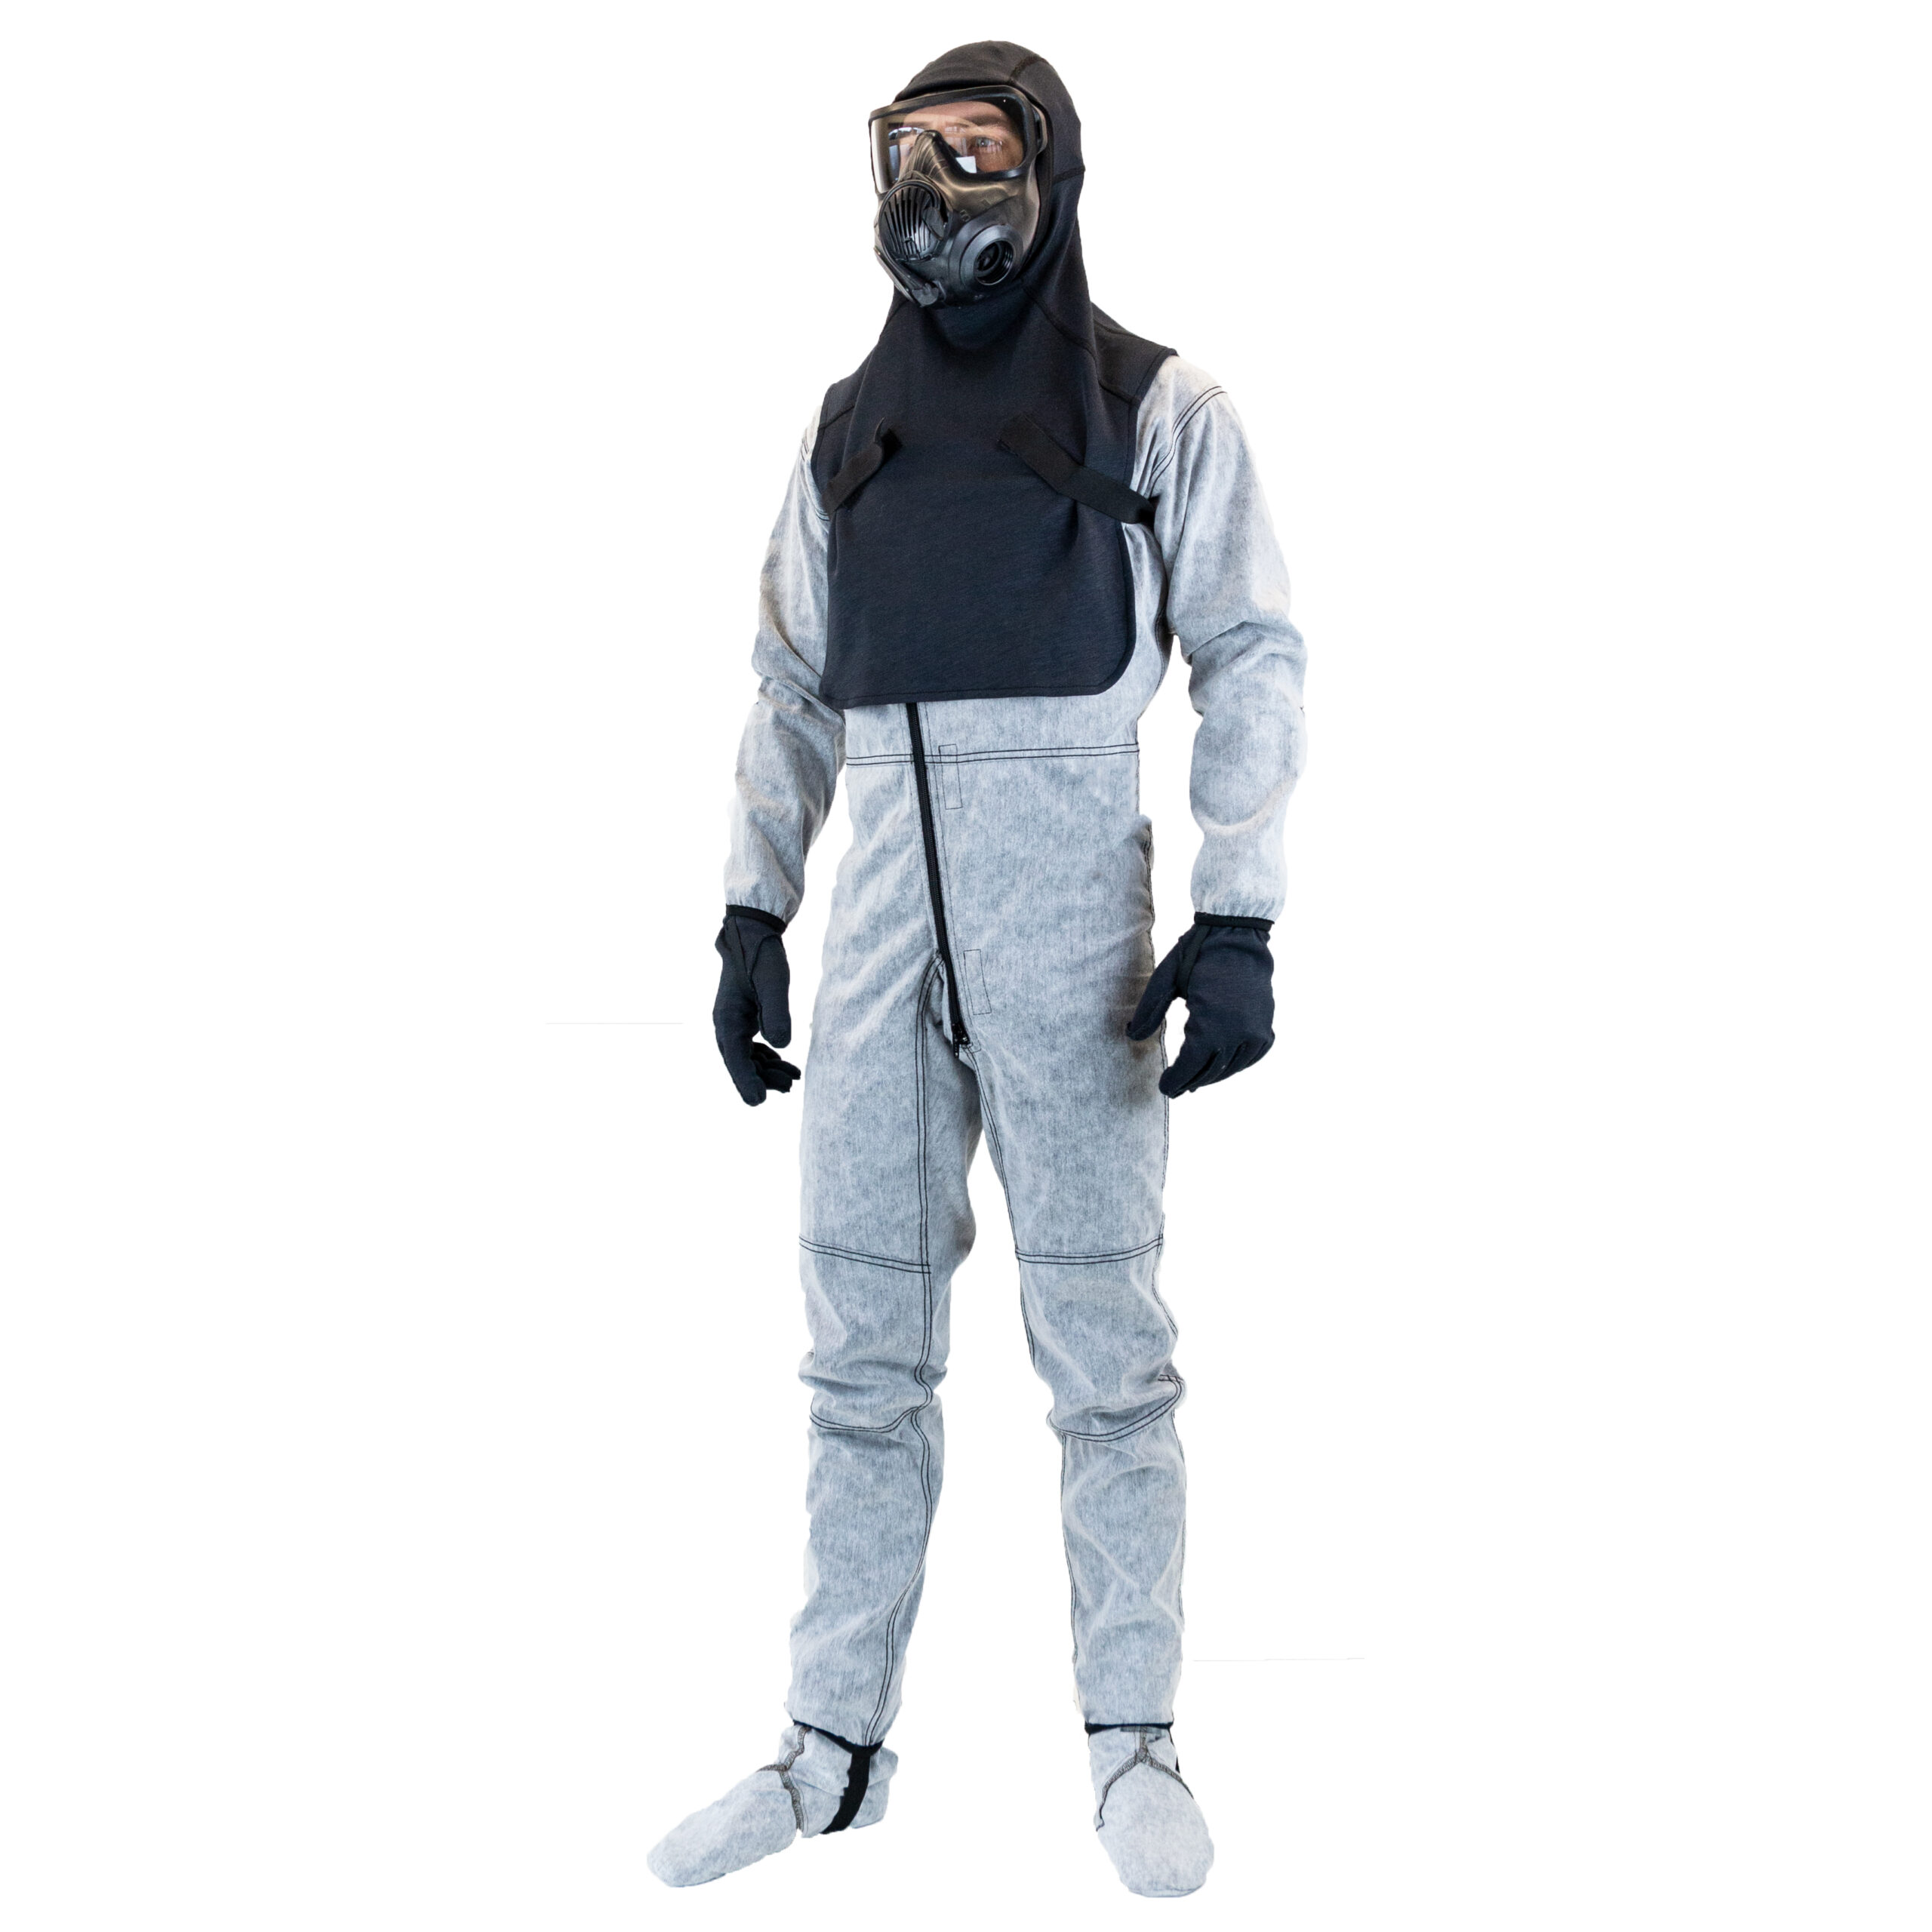 Shield - Chemical protective Undergarment (CPU)